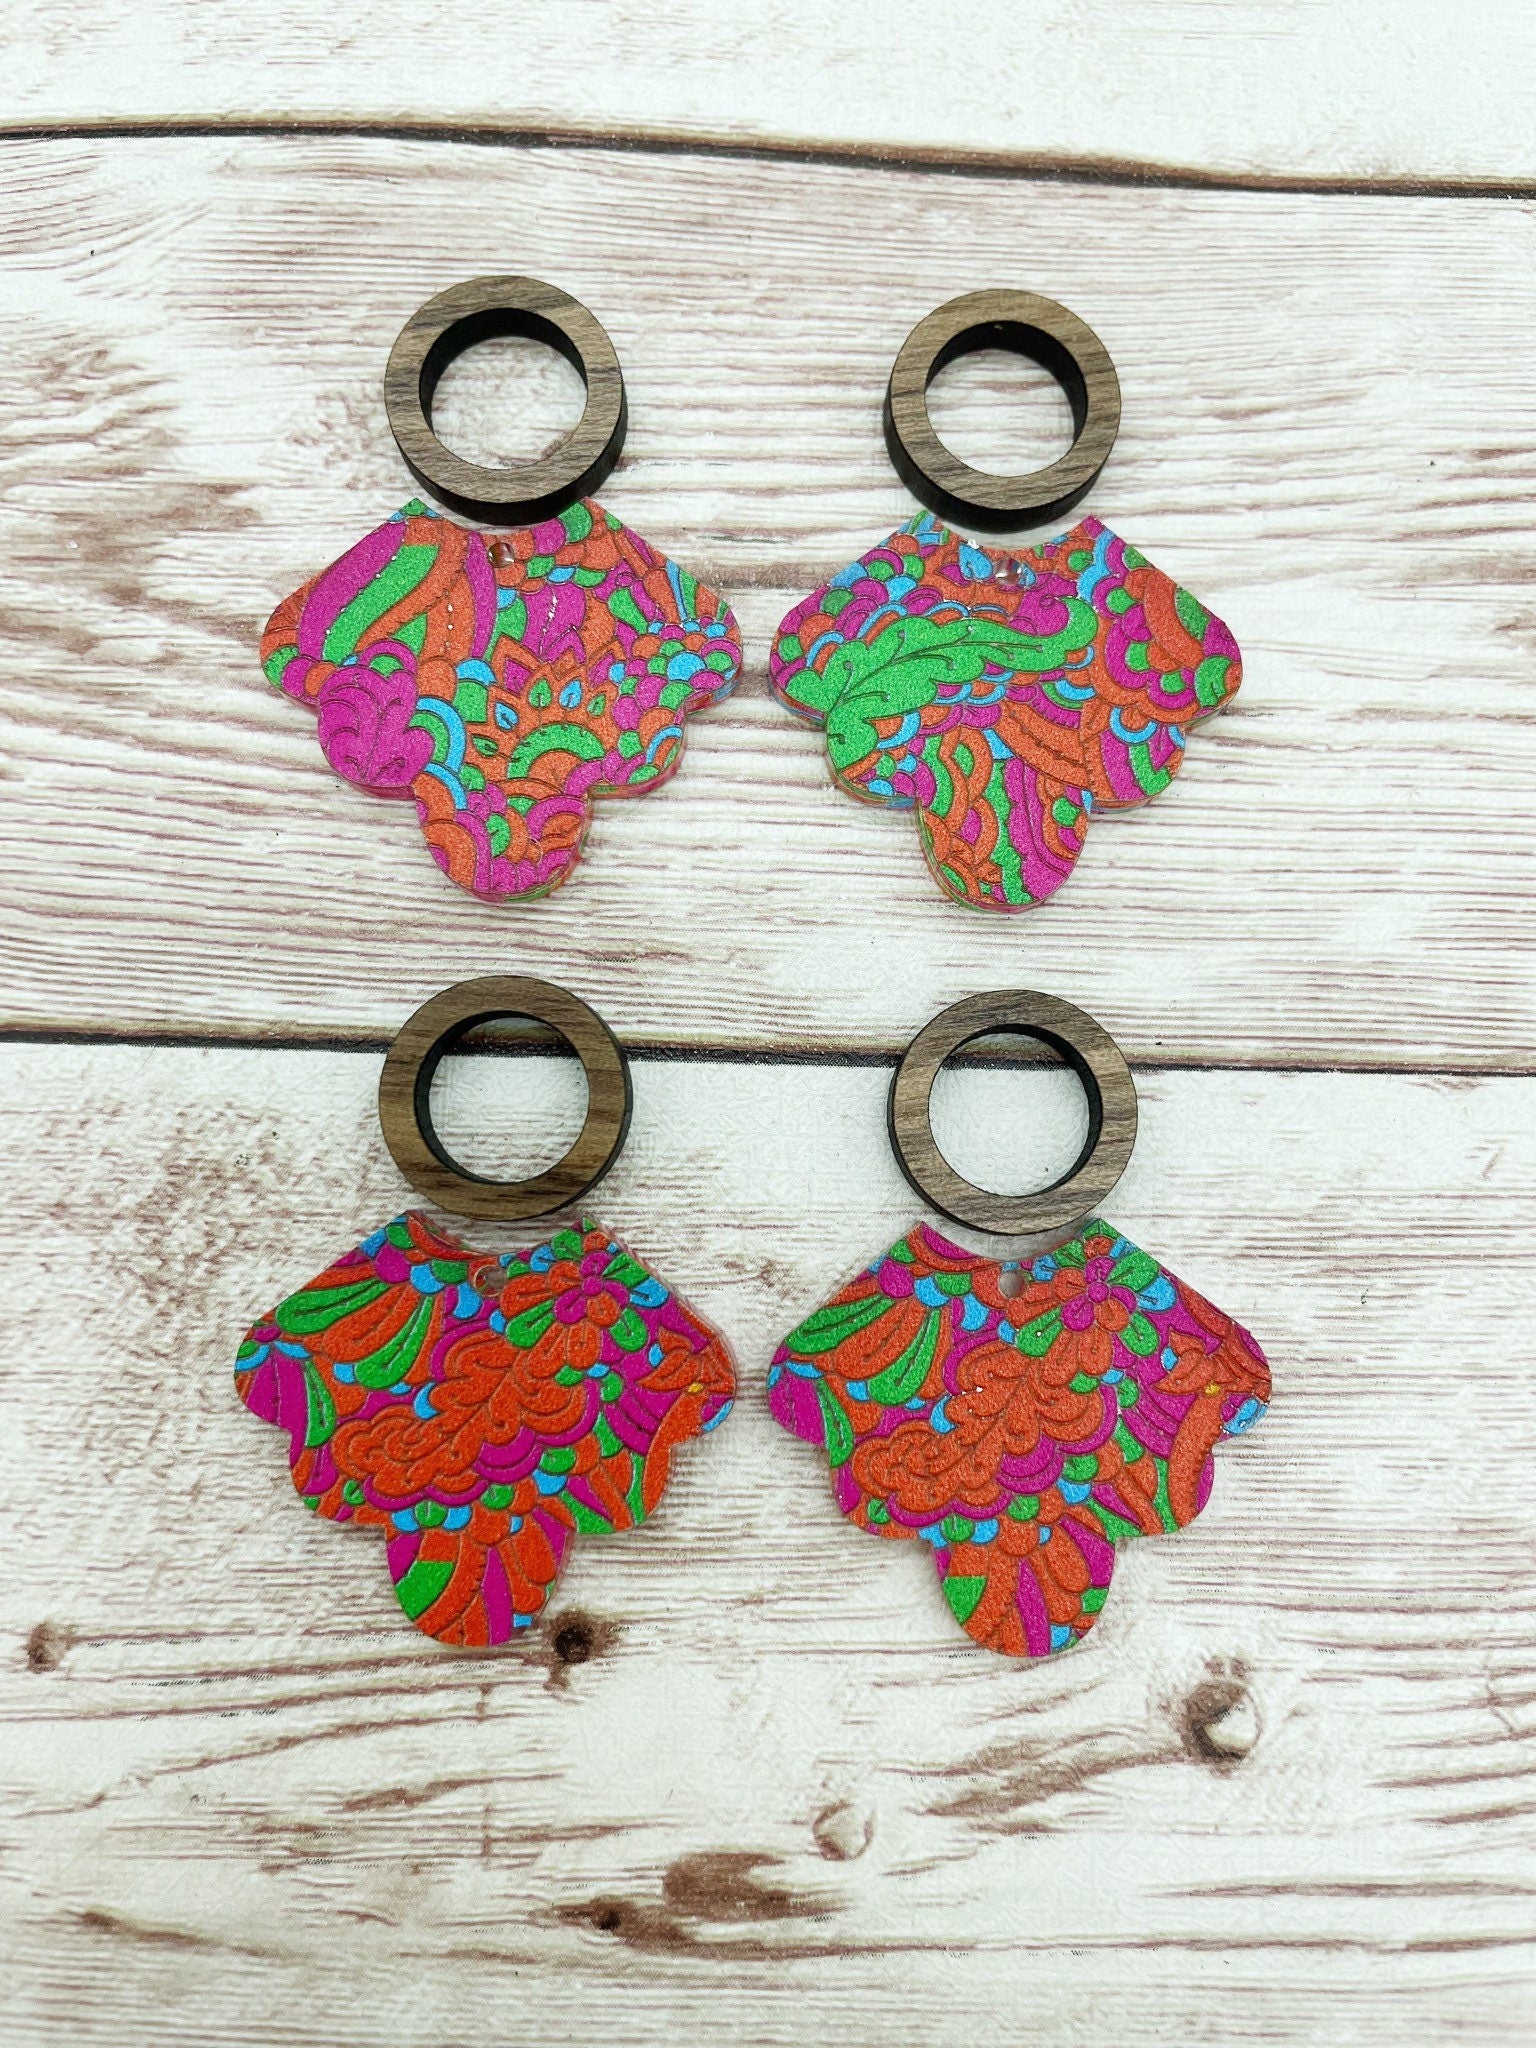 Patterned Bright Summer Doodles Scalloped Acrylic and Wood Circle Earring Blanks, DIY Jewelry Making